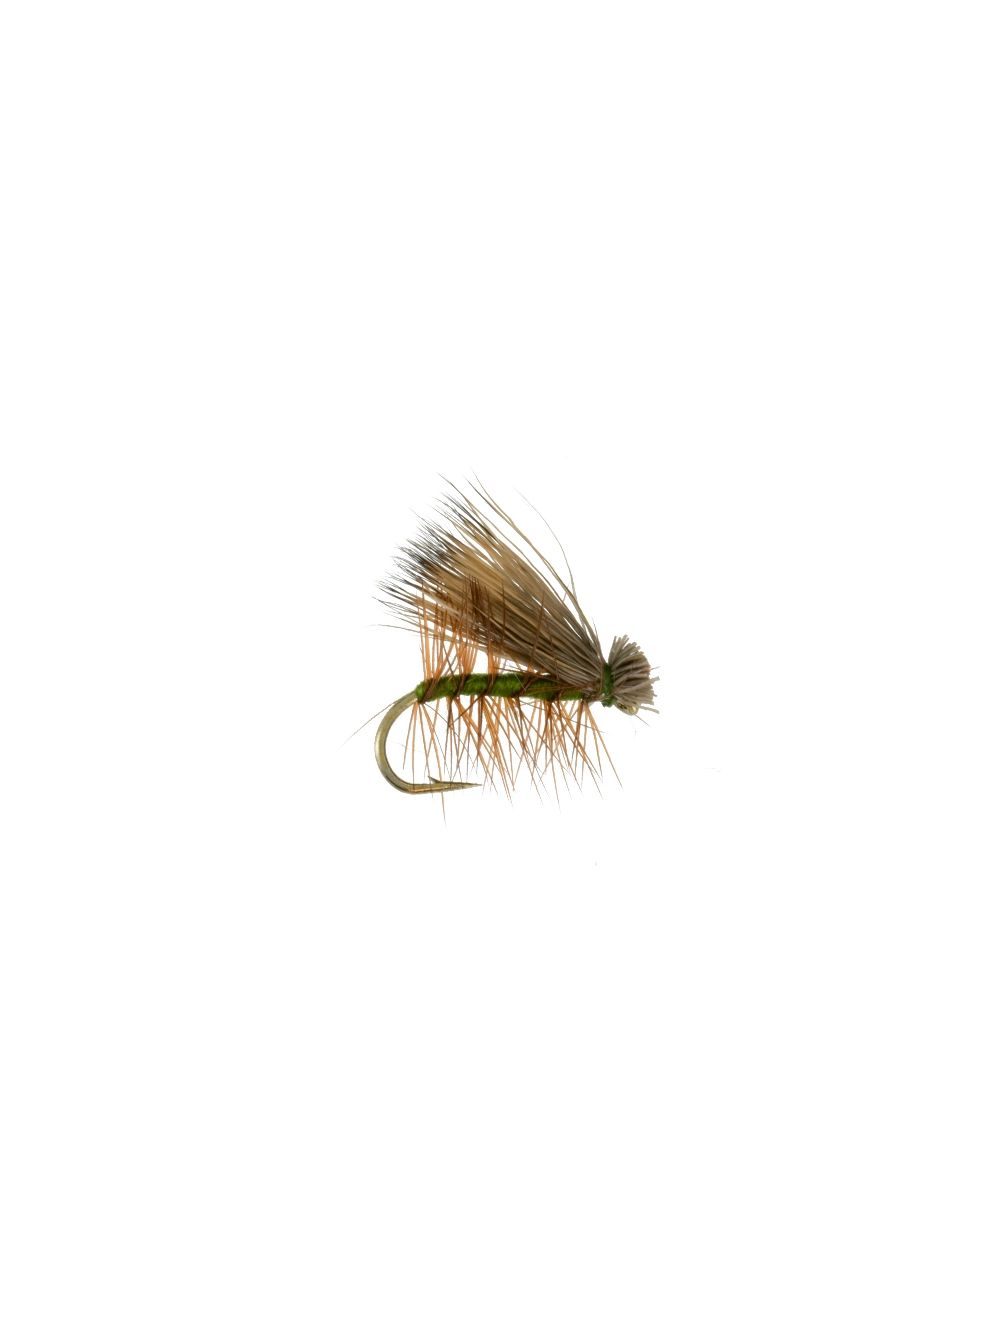 Barbless CDC Olive Caddis Dry Fly - Trout Fly Fishing Flies